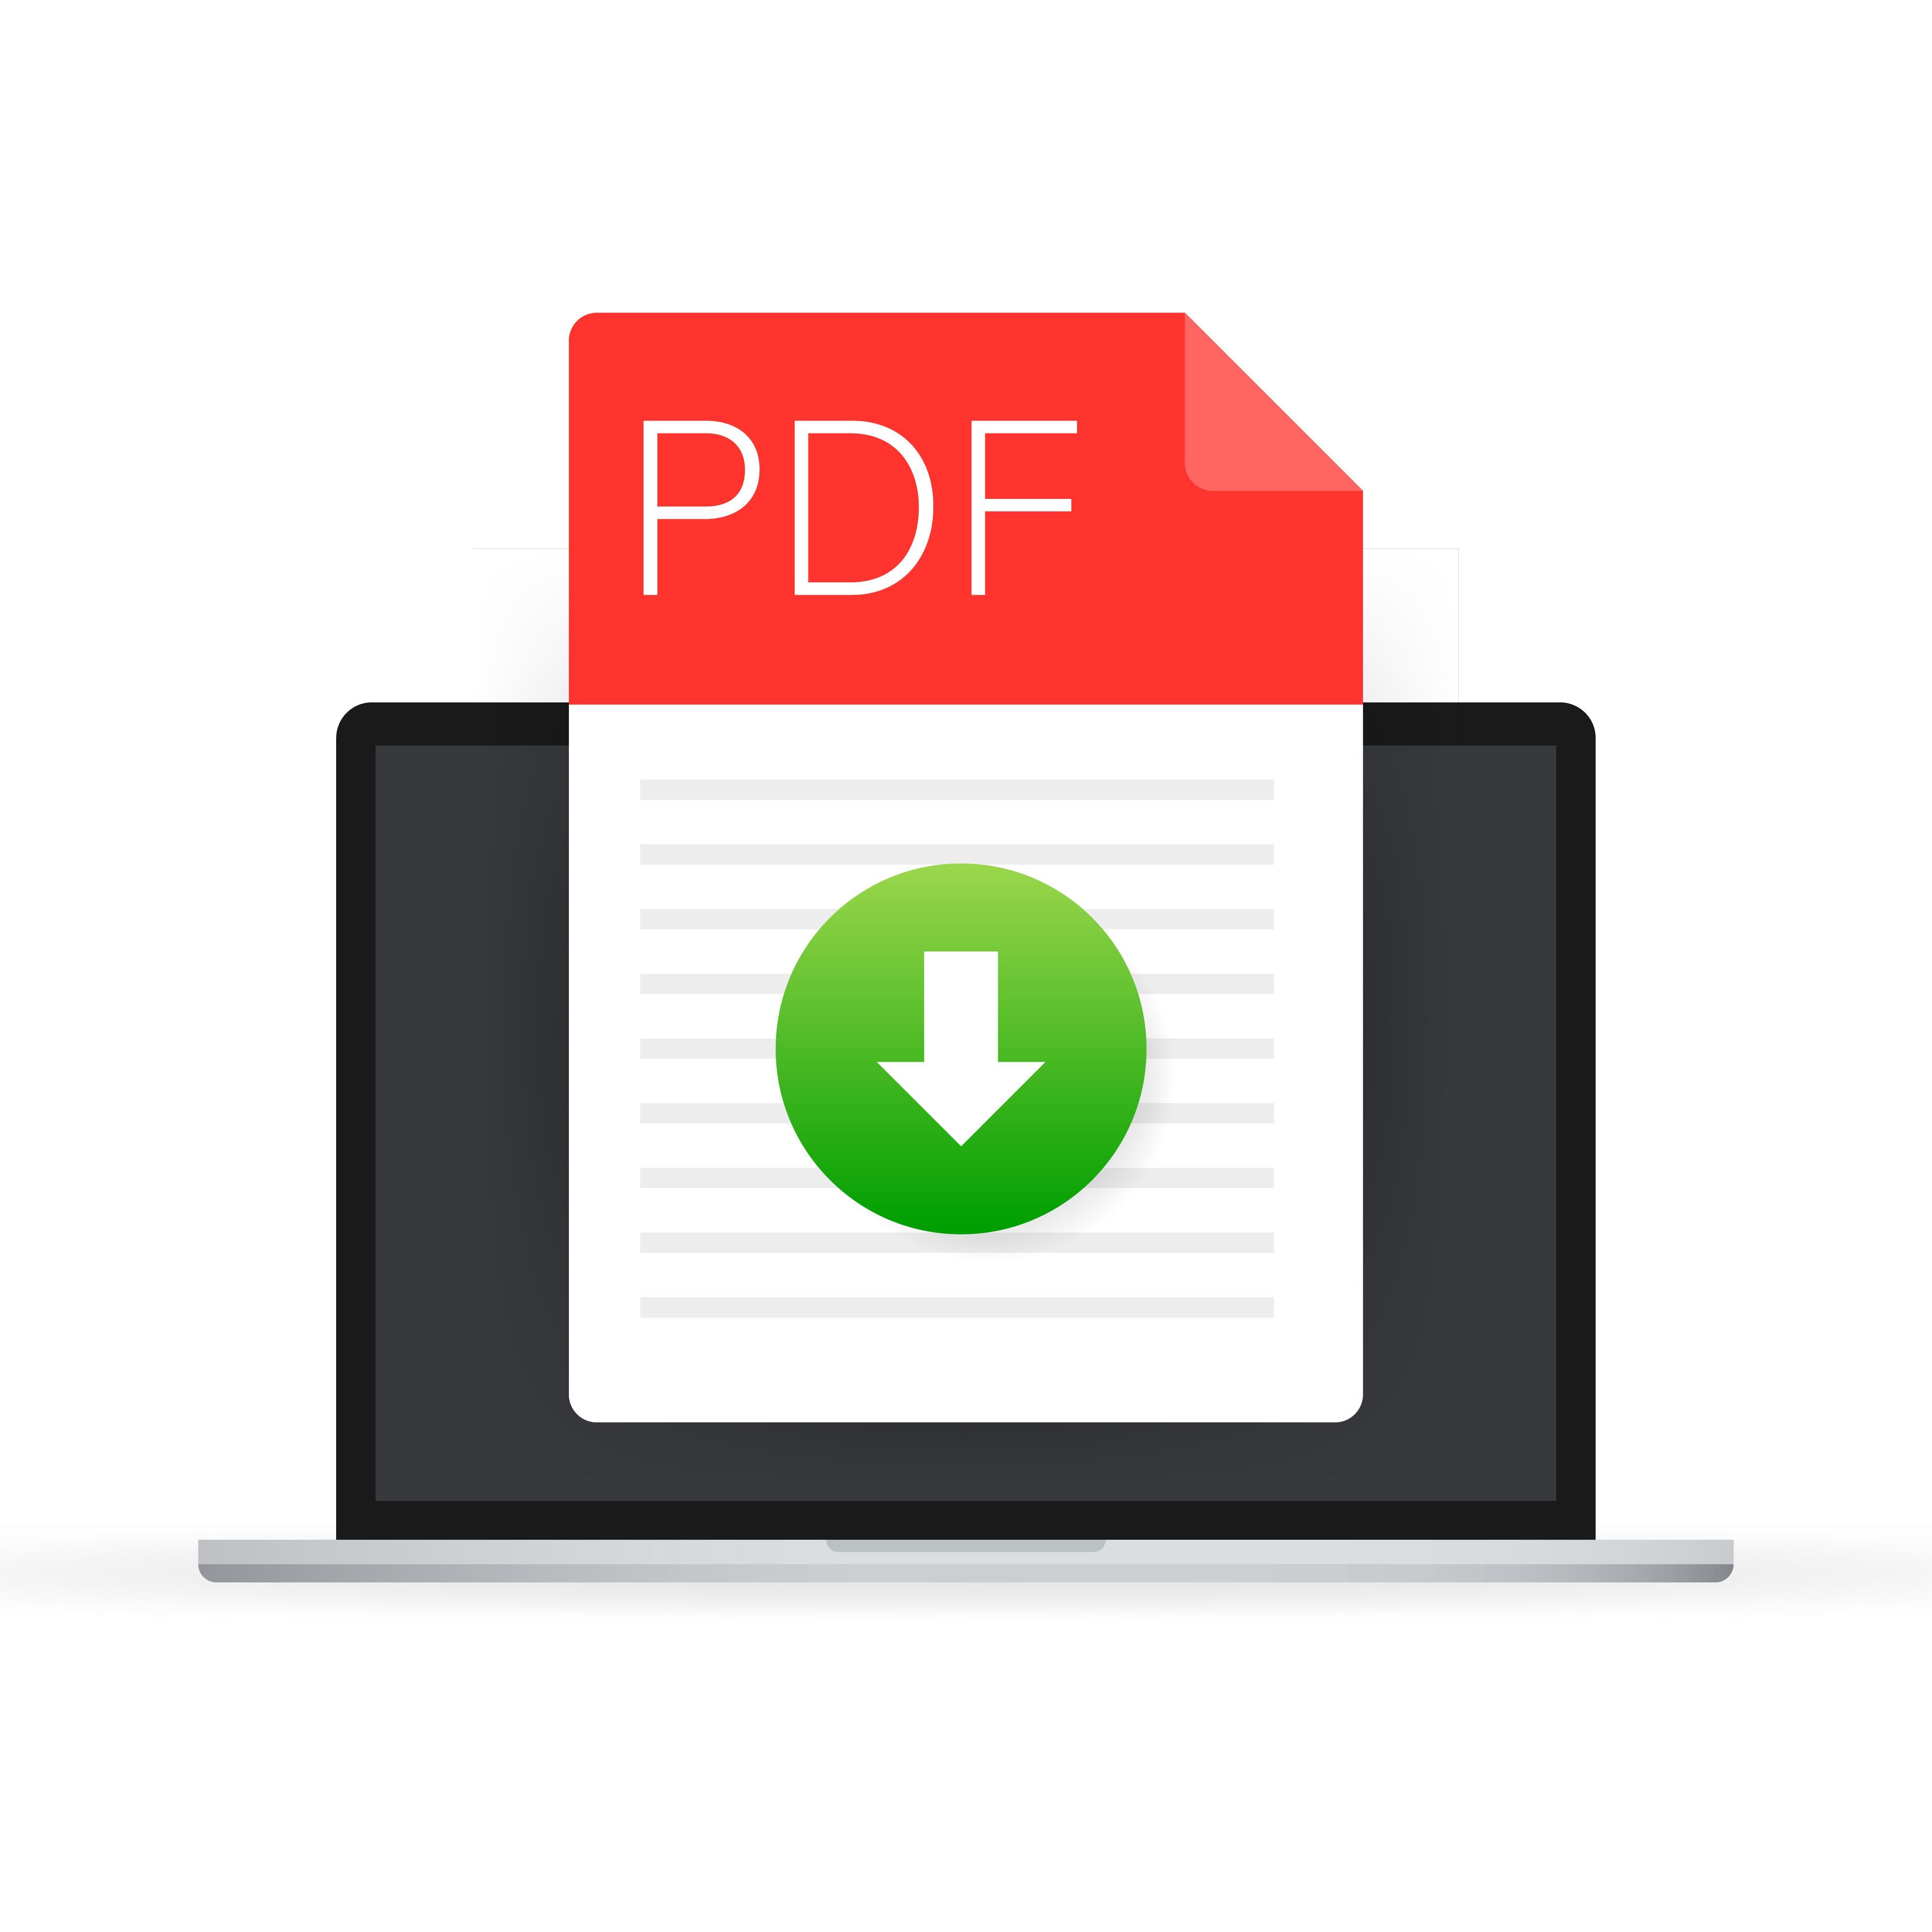 Know Your PDF: Get to know what a PDF is and what it can do for you